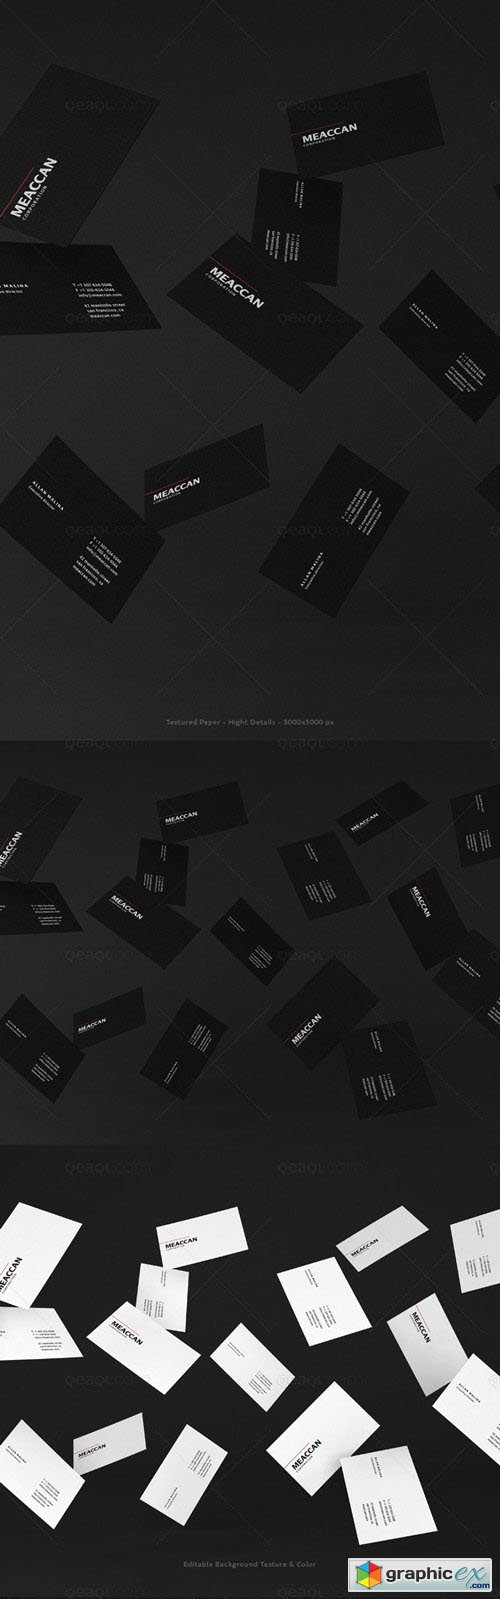 Business Card Mockup - Black And Corporate